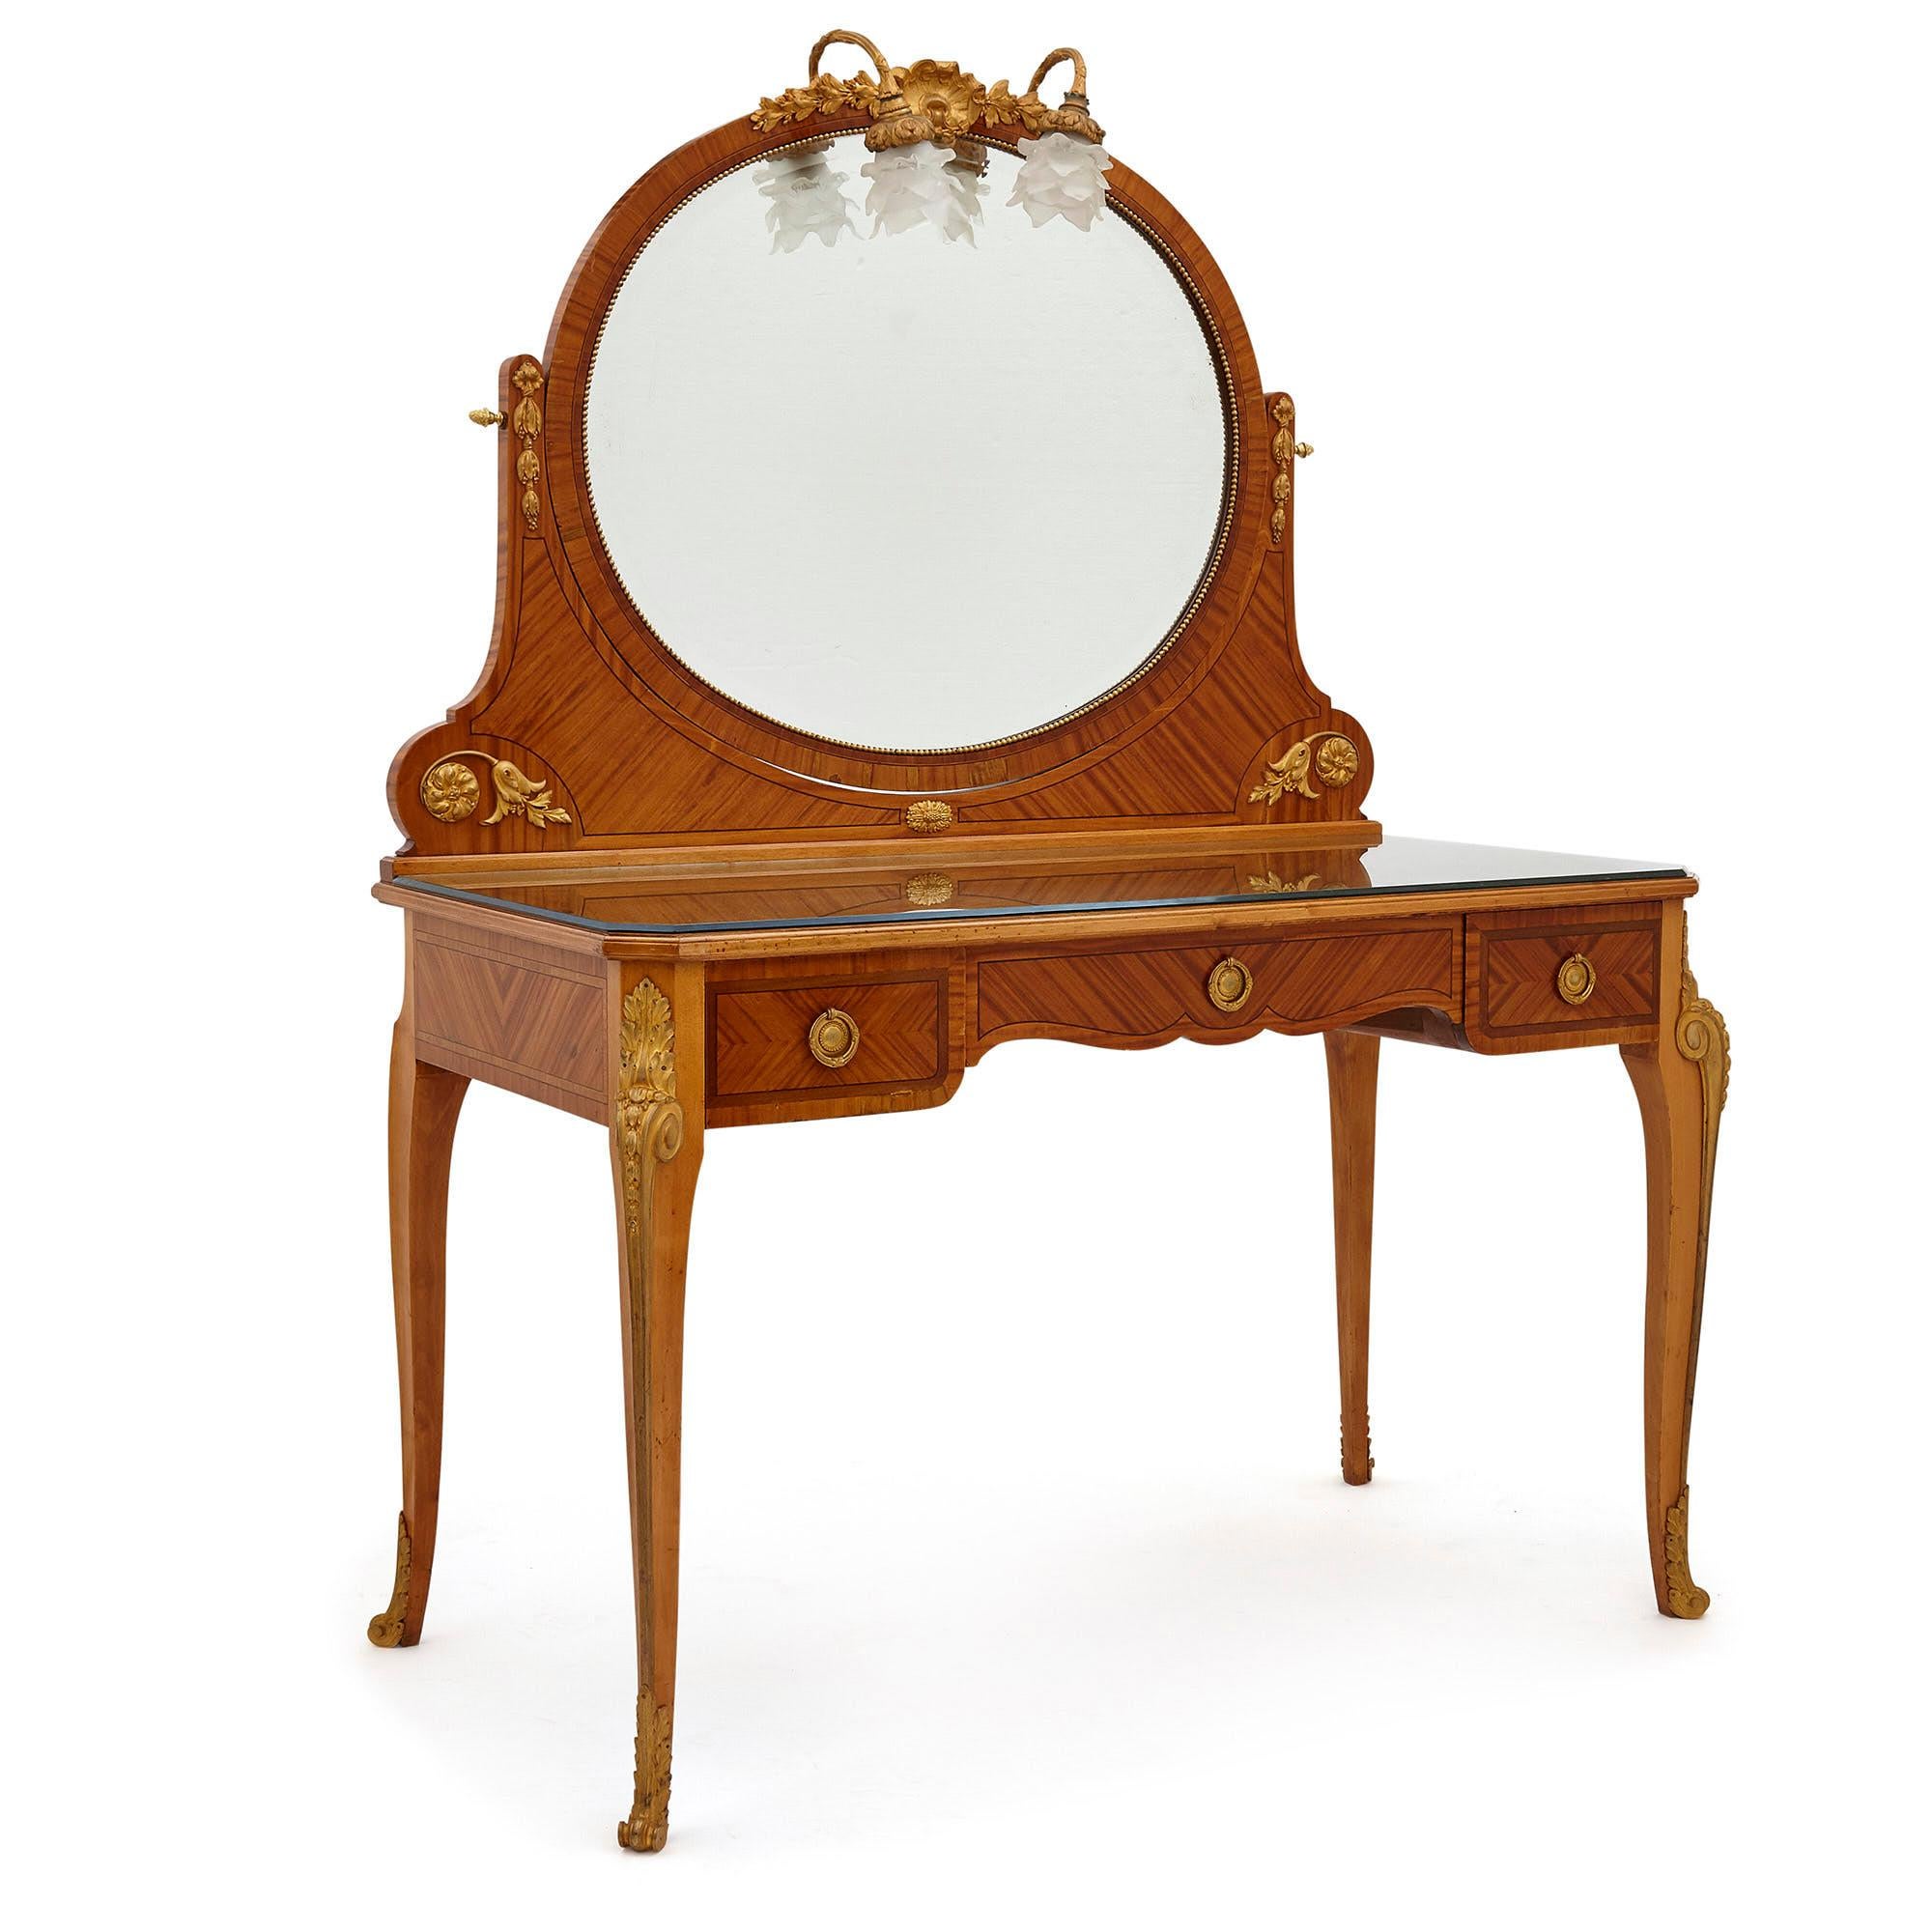 Antique Parisian neoclassical style dressing table set by Au Gros Chêne,
French, late 19th century
Dressing table: Height 167cm, width 124cm, depth 65cm
Chair: Height 95cm, width 44cm, depth 42cm

This elegant dressing table and chair set is